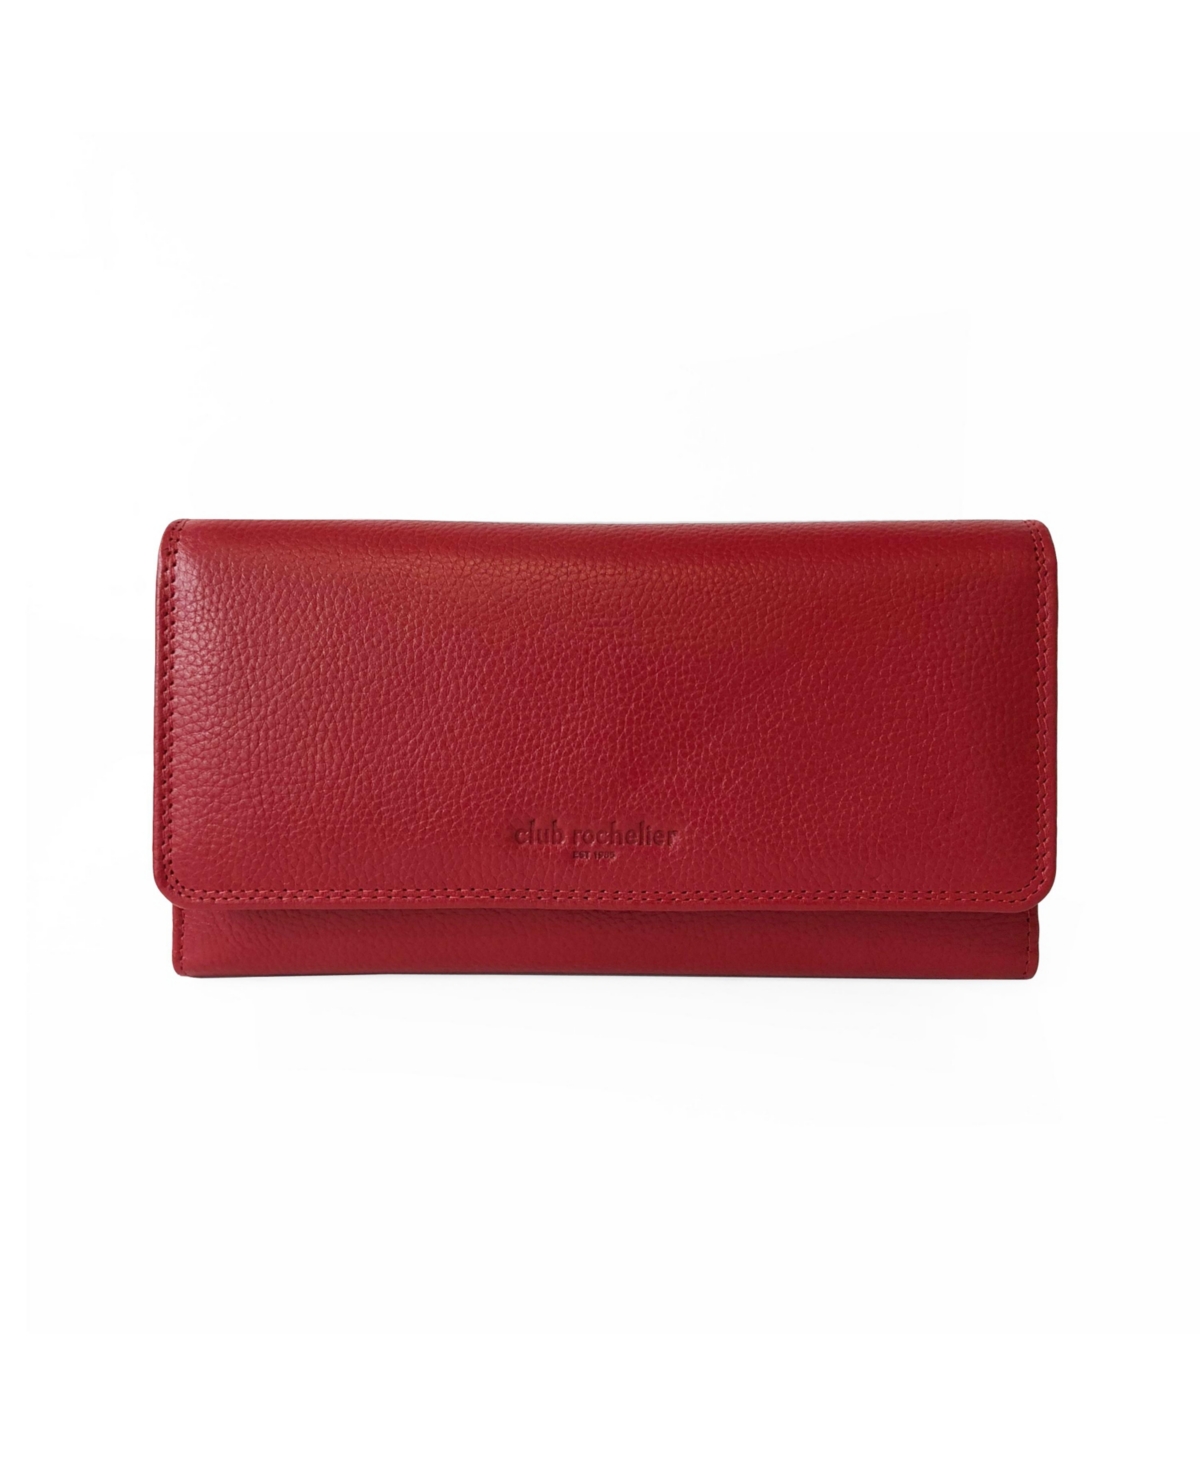 Ladies Leather Clutch Wallet with Checkbook and Gusset - Navy